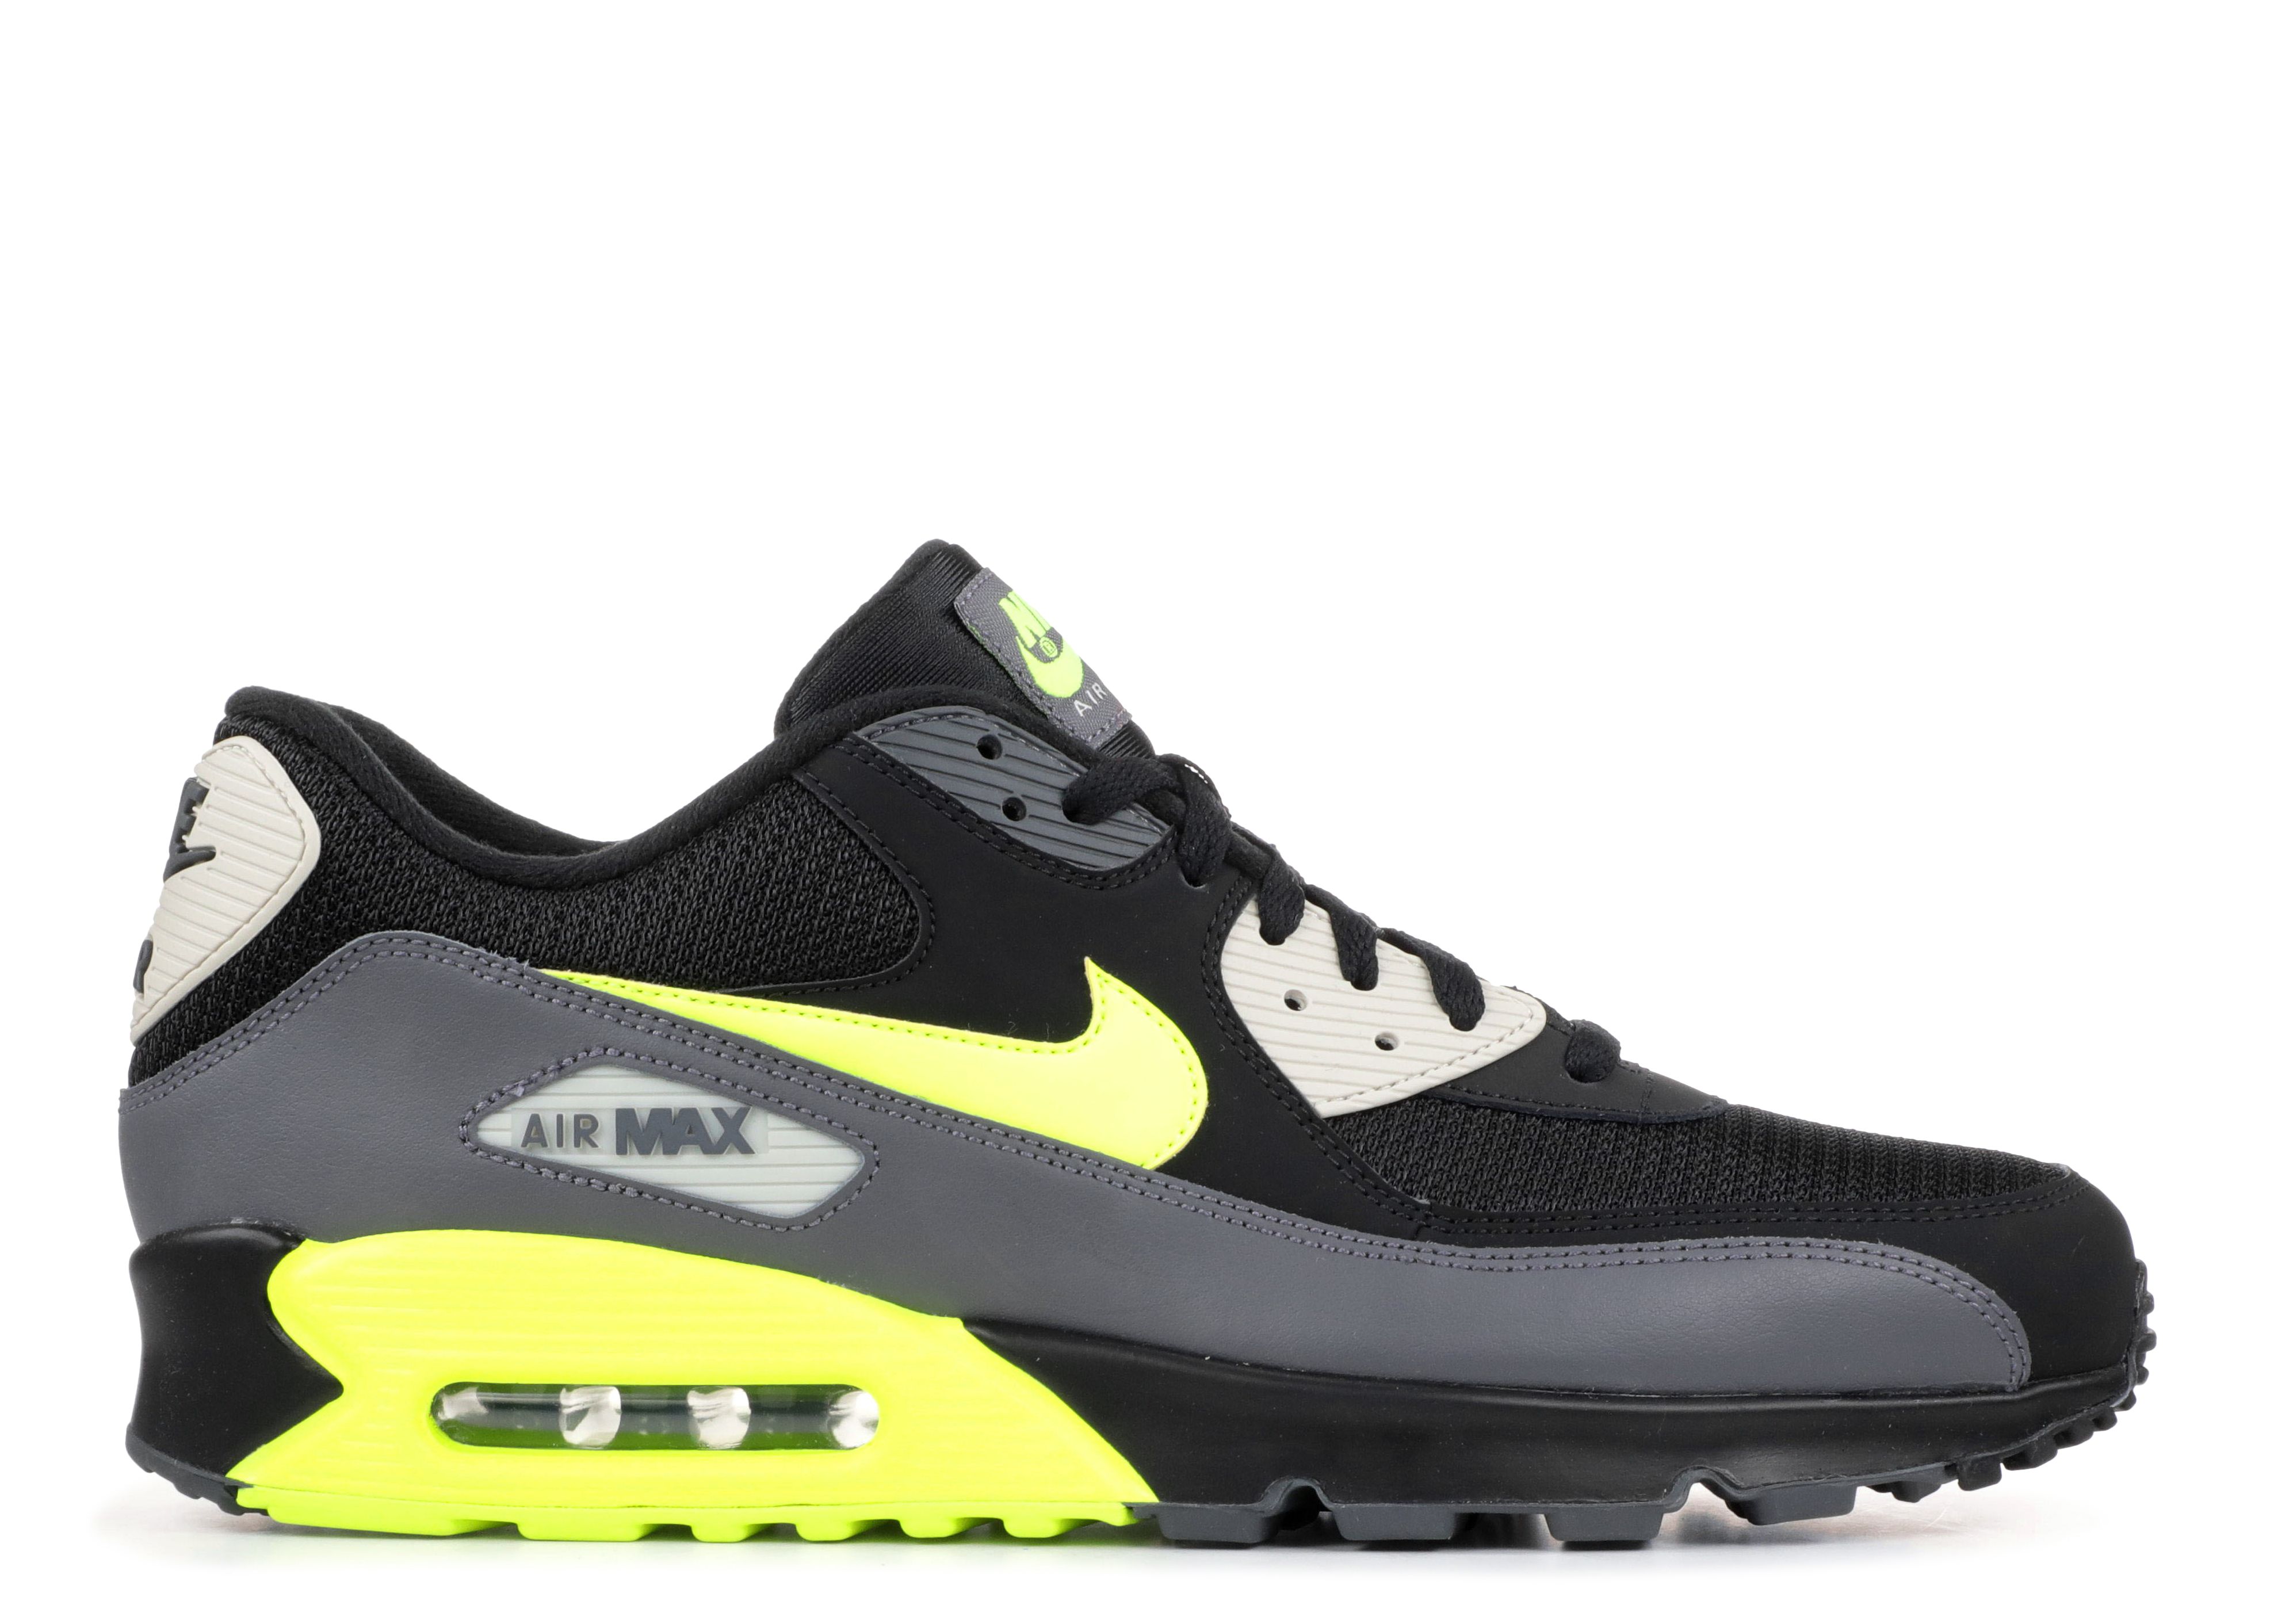 Details about Nike Air Max 90 (GS) Infrared Volt B